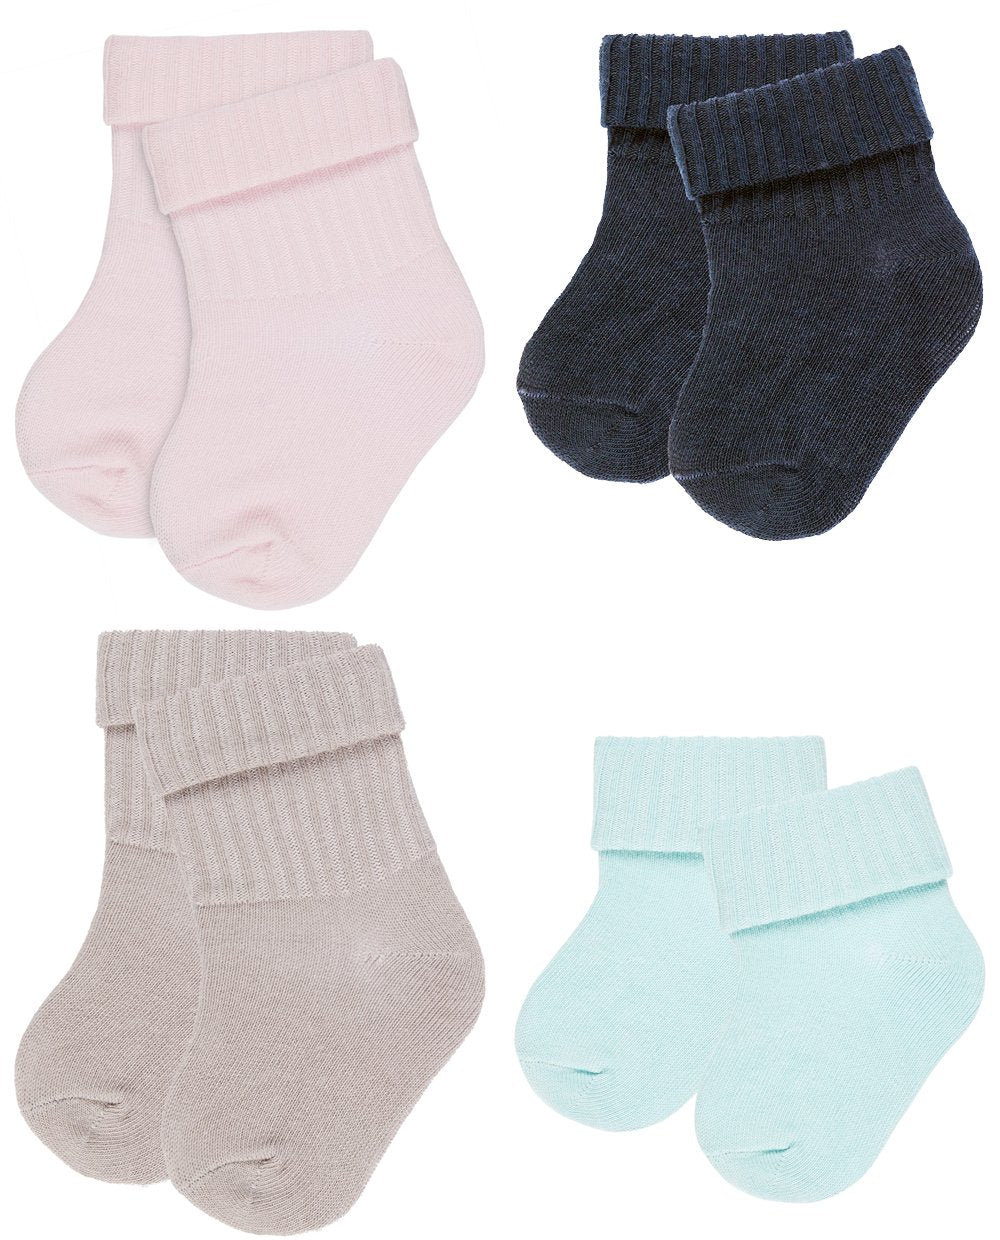 Name it Baby socks available in aqua, pink, stone or navy. Ages 0 - 9 months